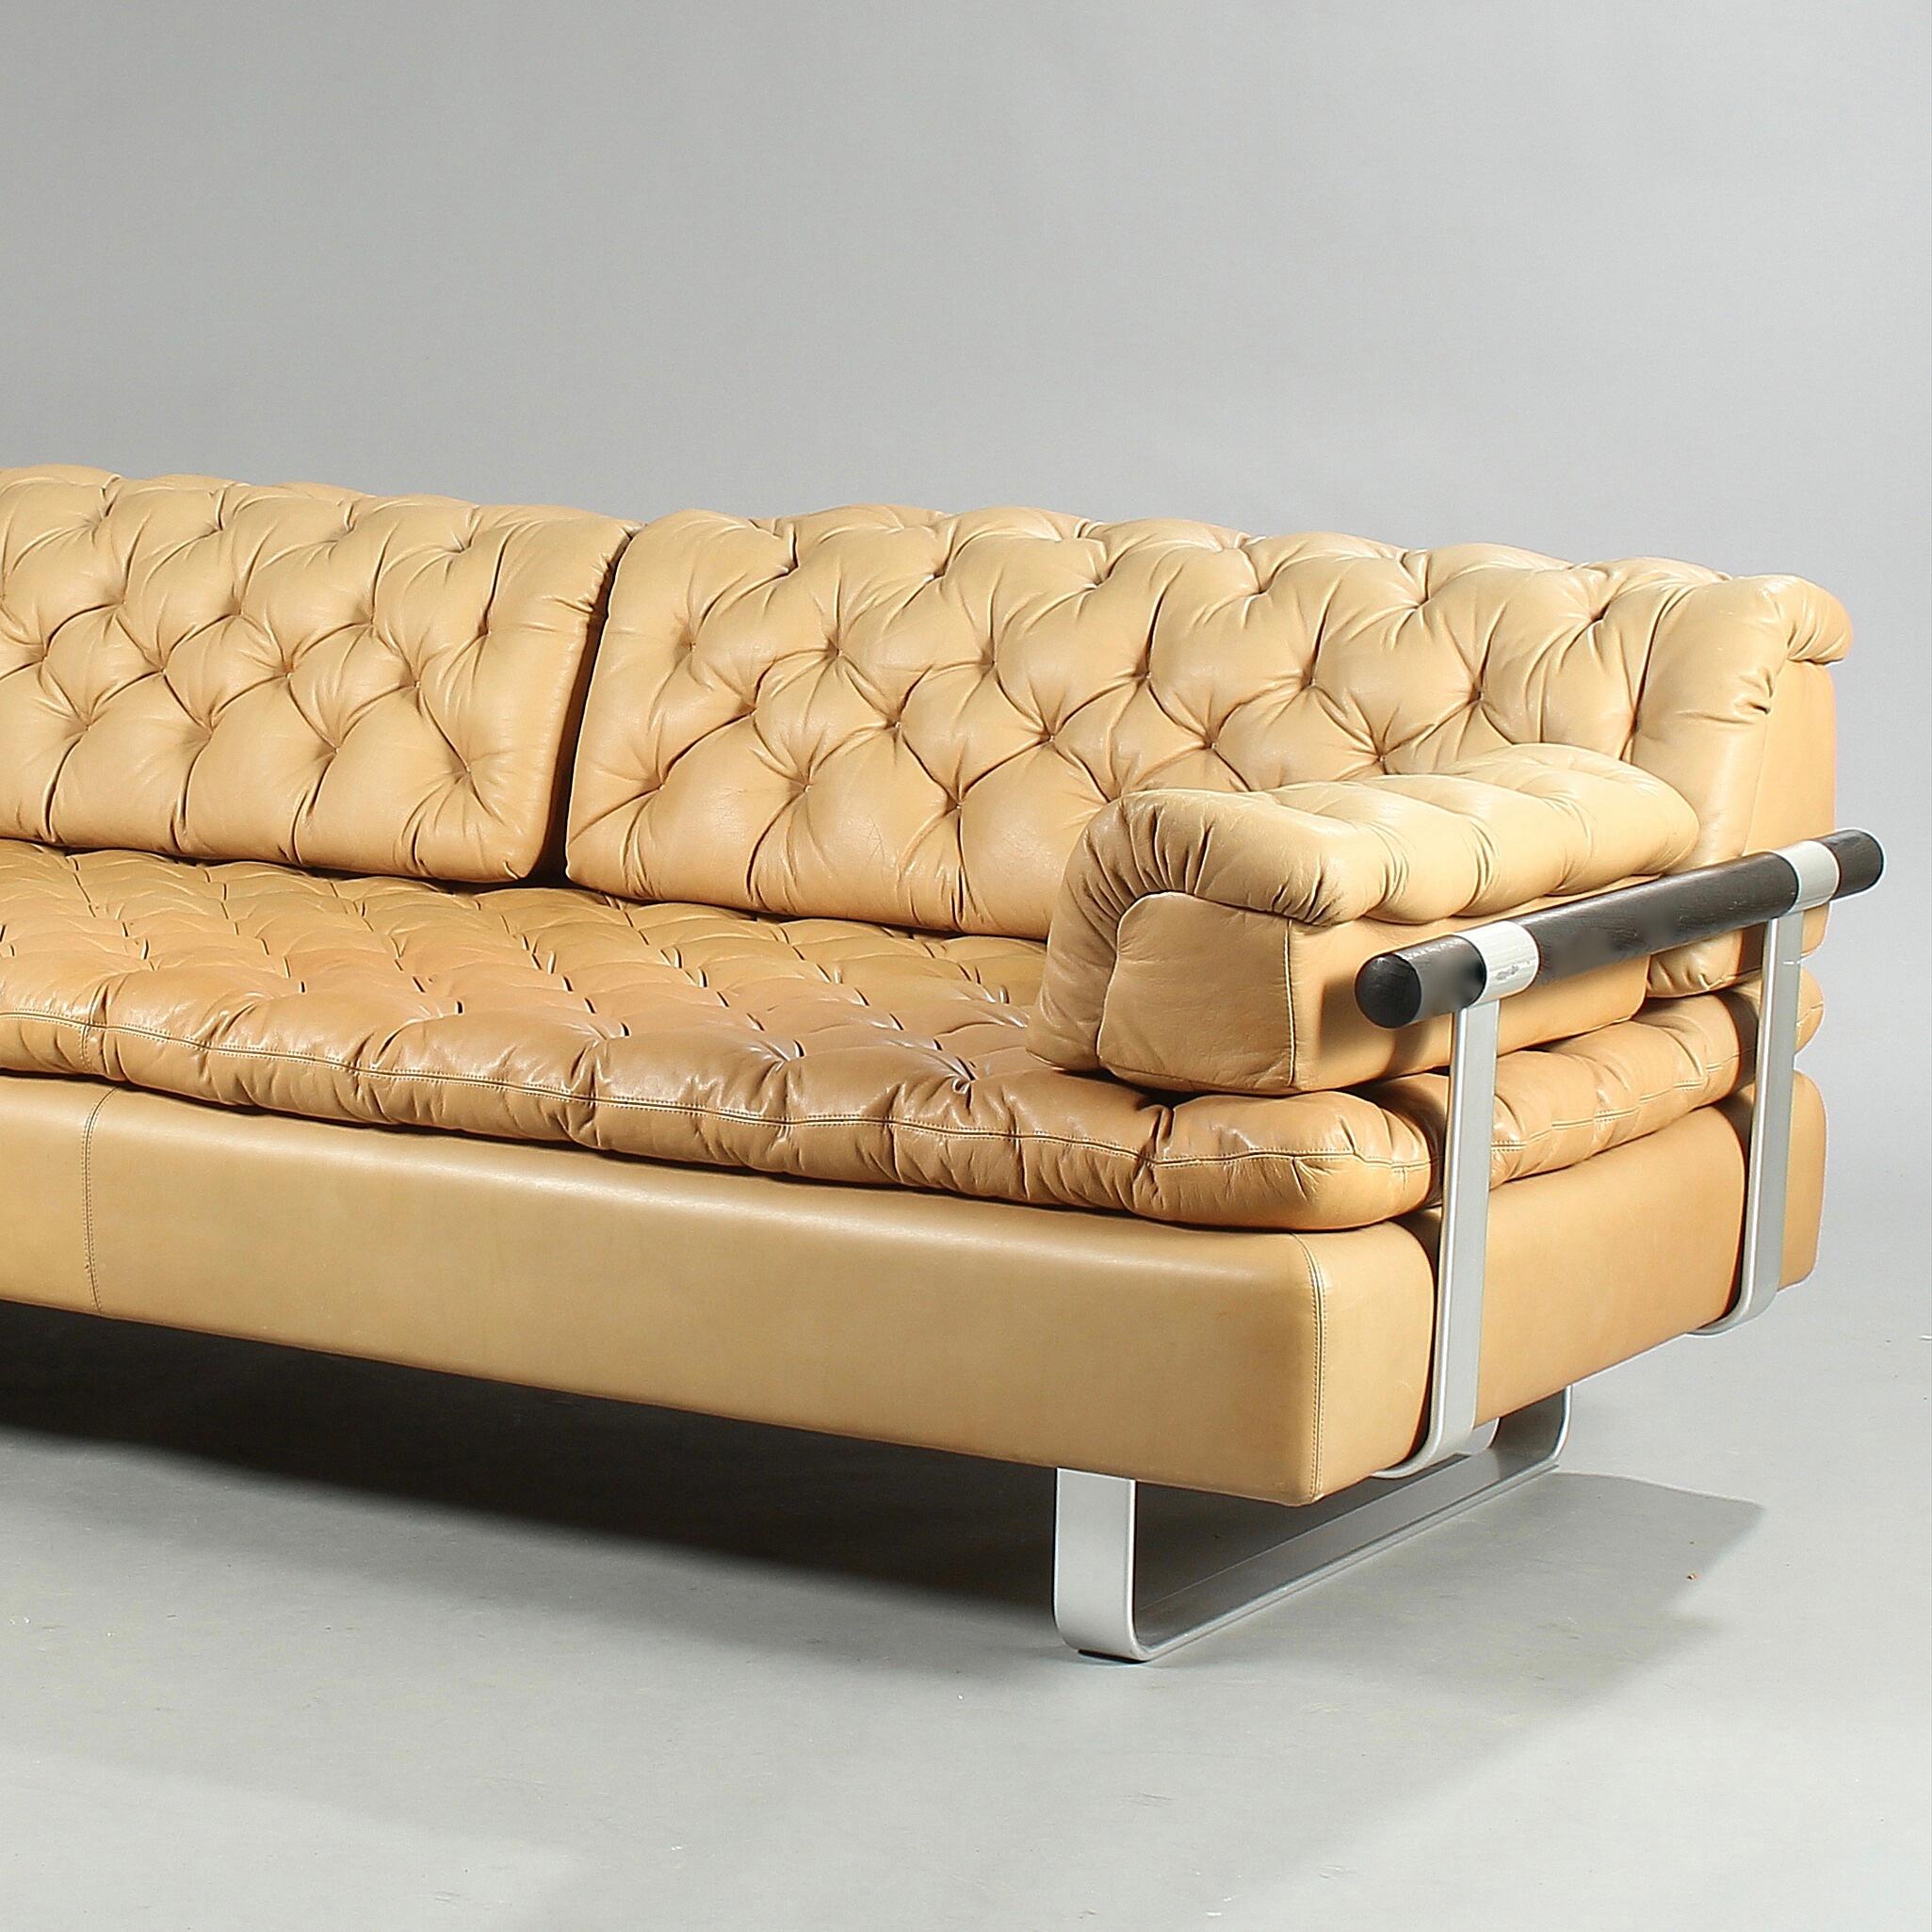 A daybed upholstered with natural colored leather, back and side with aluminium frame and dark oak pole. Manufactured and marked by DUX. Sweden. Measures: L. 206, D. 90 cm.